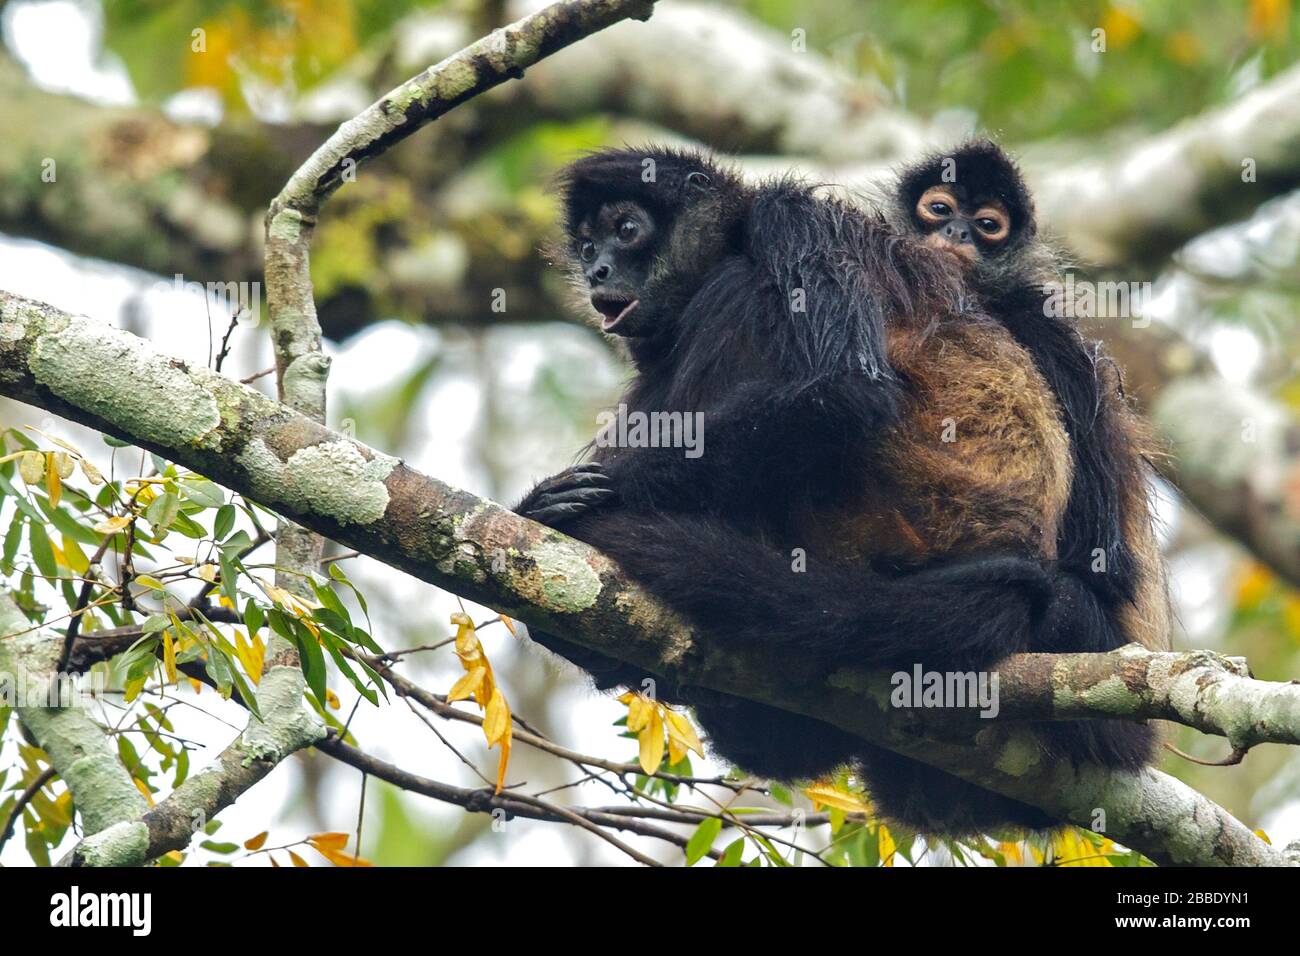 Spider Monkey, Simia paniscus, perched on a branch in Guatemala in Central America Stock Photo